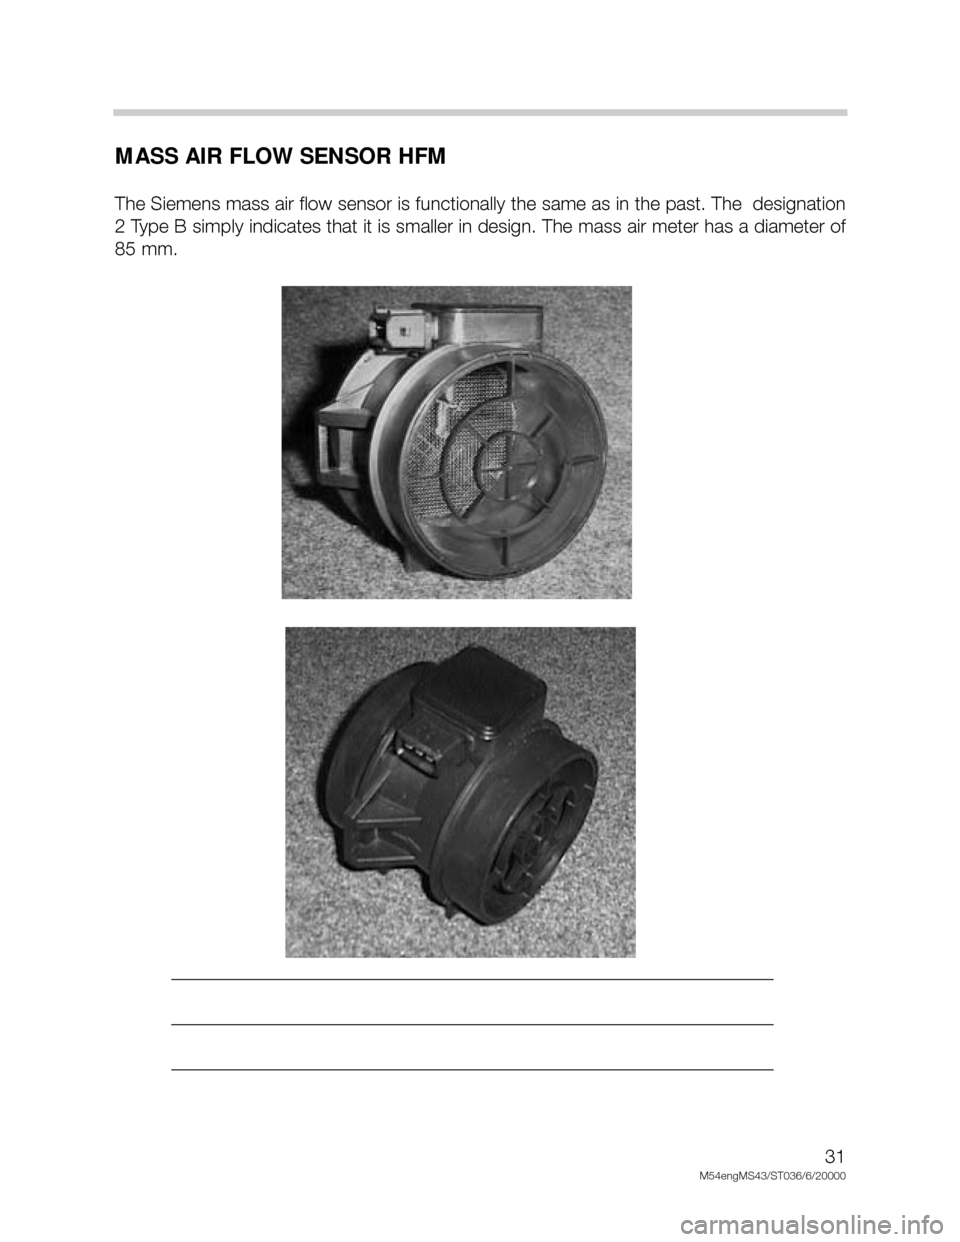 BMW X5 2005 E53 M54 Engine Owners Guide 31
M54engMS43/ST036/6/20000
MASS AIR FLOW SENSOR HFM
The Siemens mass air flow sensor is functionally the same as in the past. The  designation
2 Type B simply indicates that it is smaller in design. 